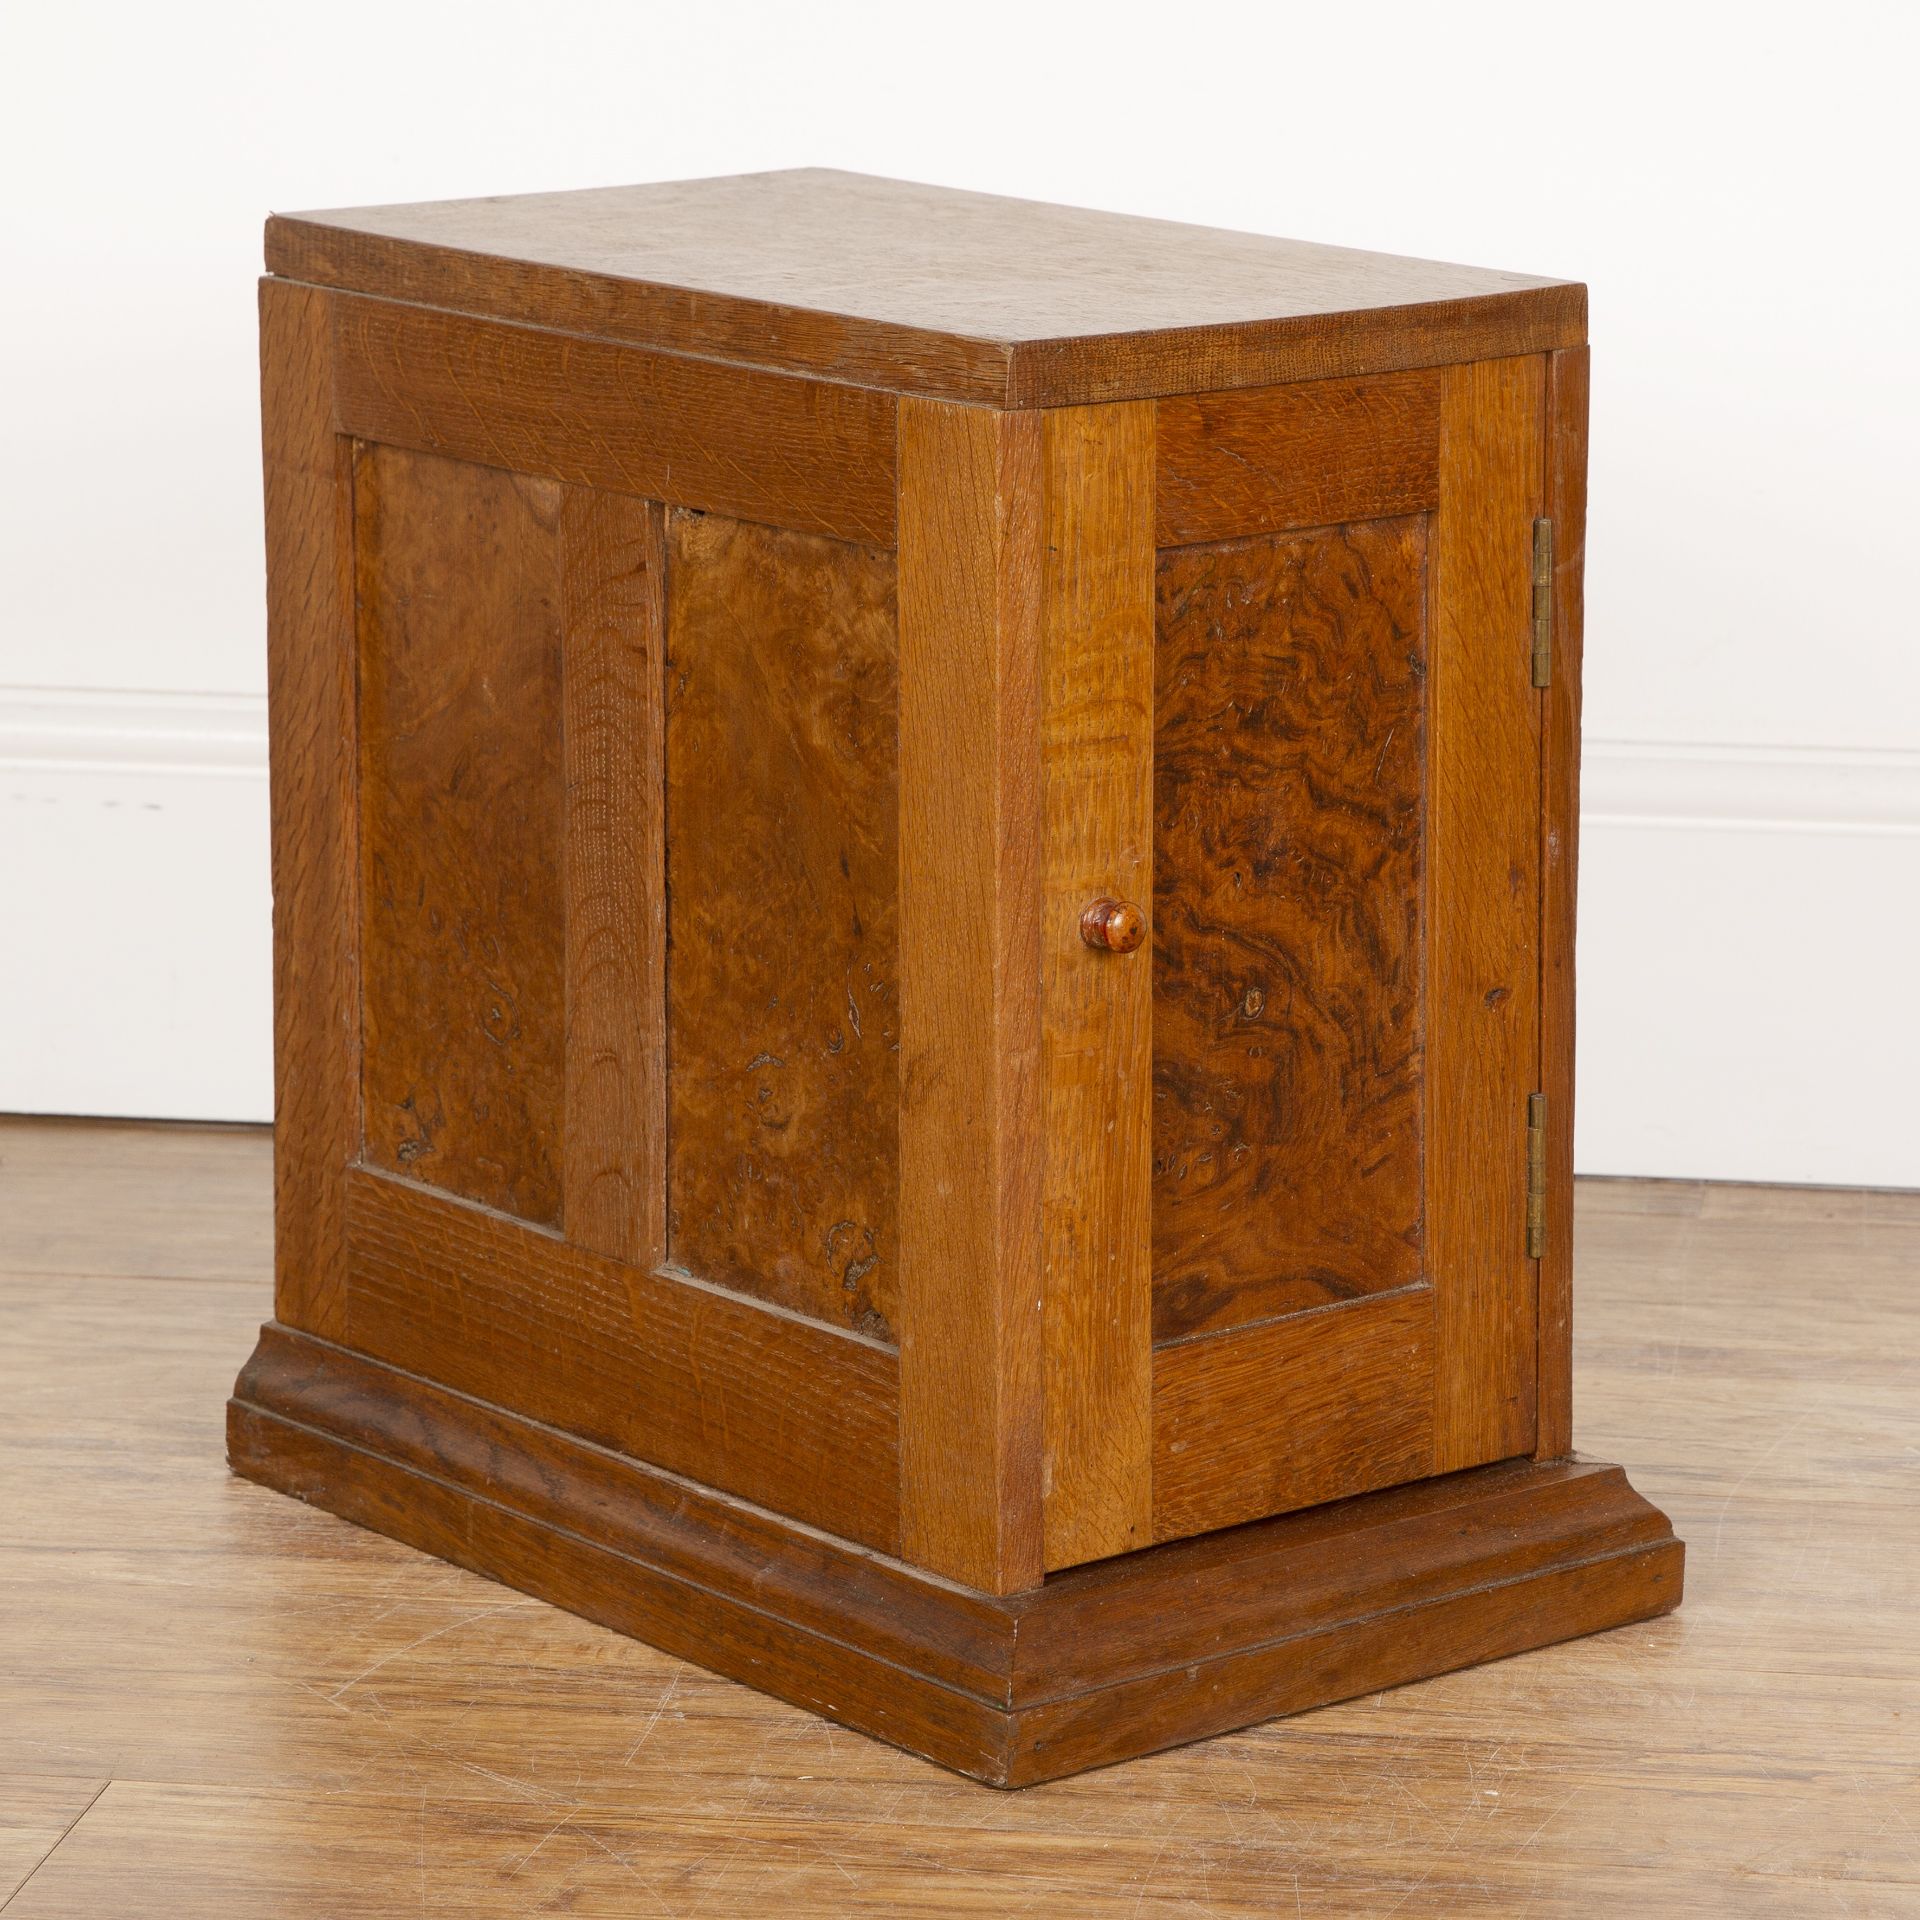 Cotswold School oak and burr walnut tabletop cupboard, with panelled doors and sides, on plinth